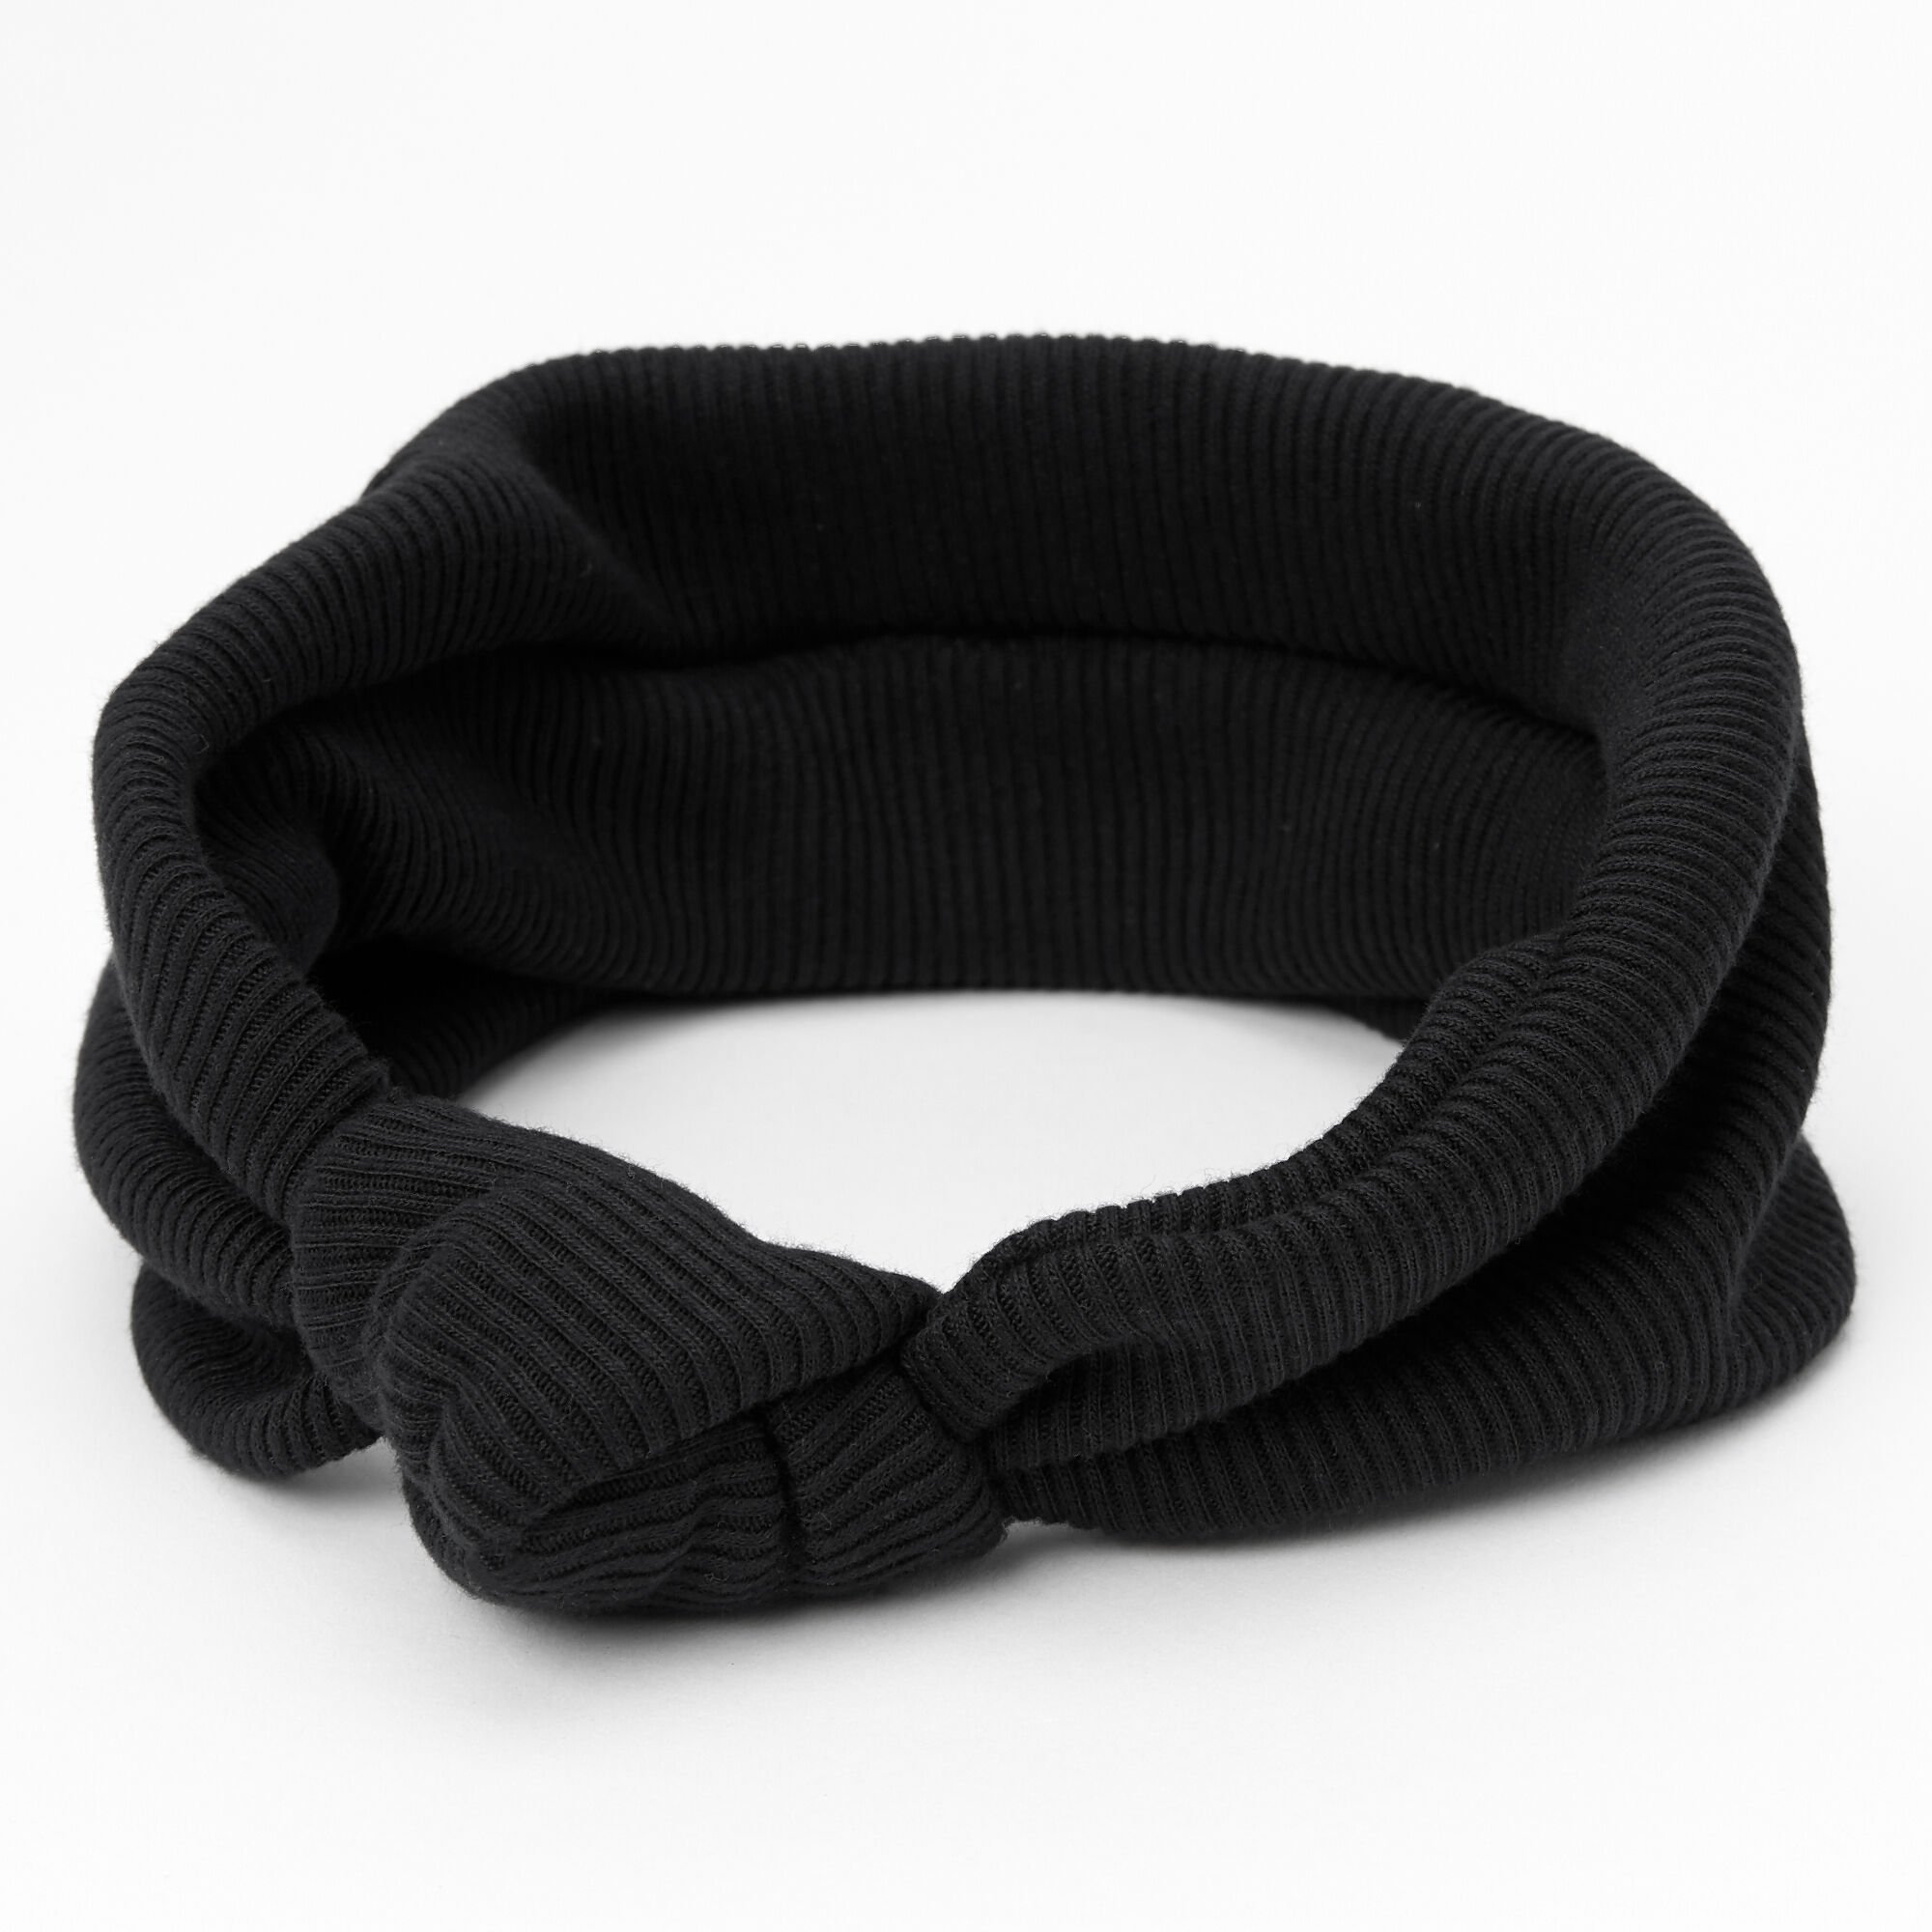 View Claires Ribbed Knotted Headwrap Black information